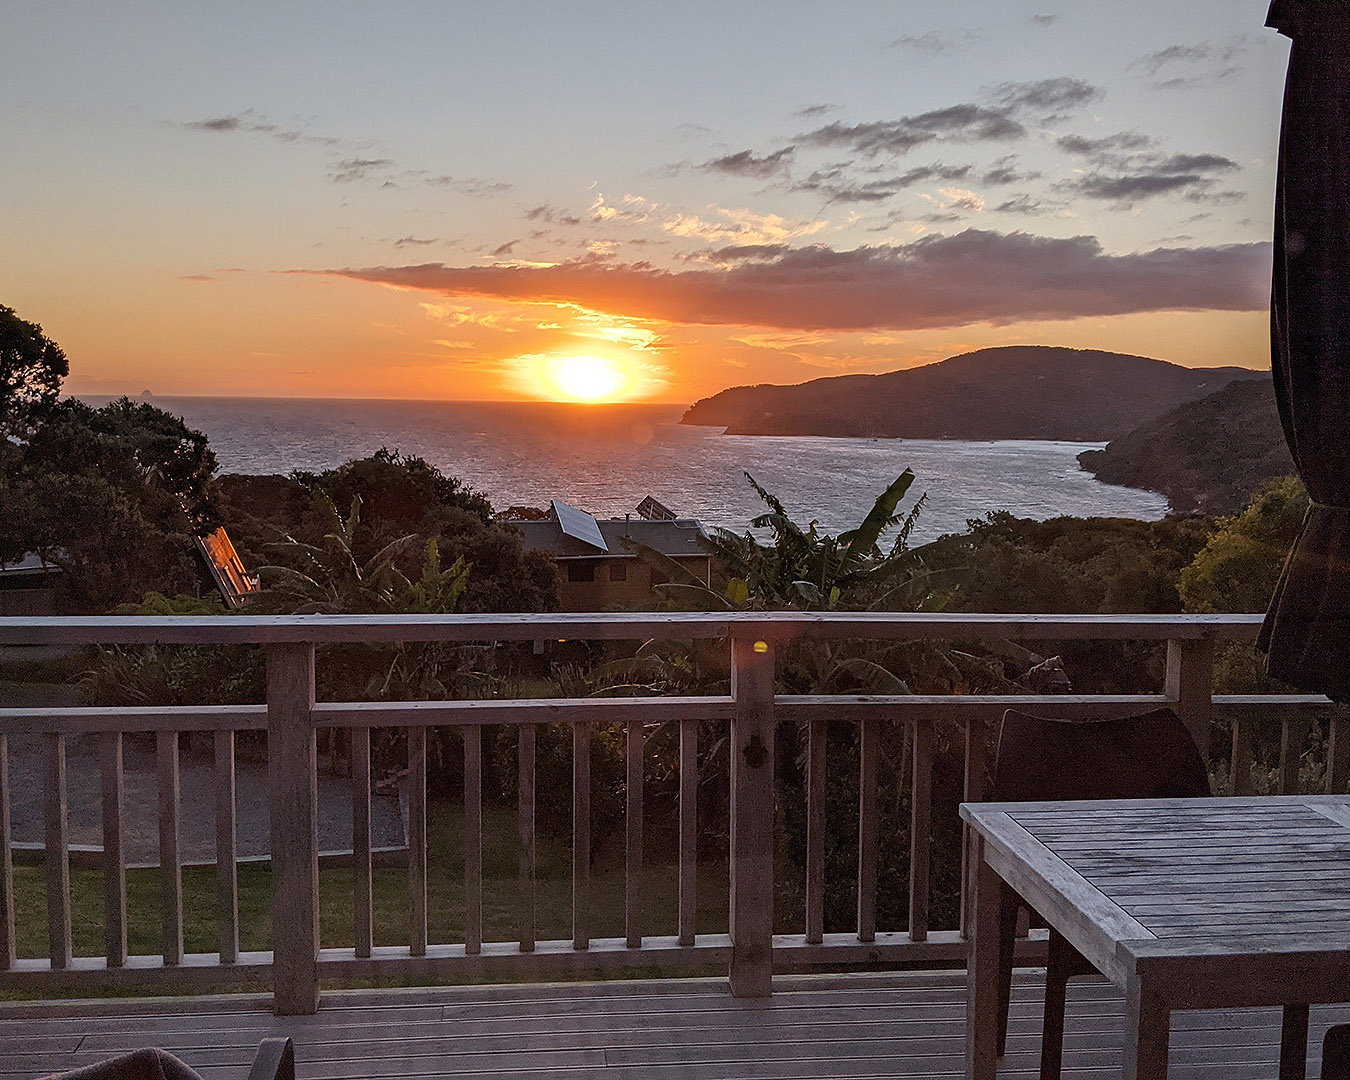 The view from the deck at Jack's Sanctuary on Great Barrier Island.